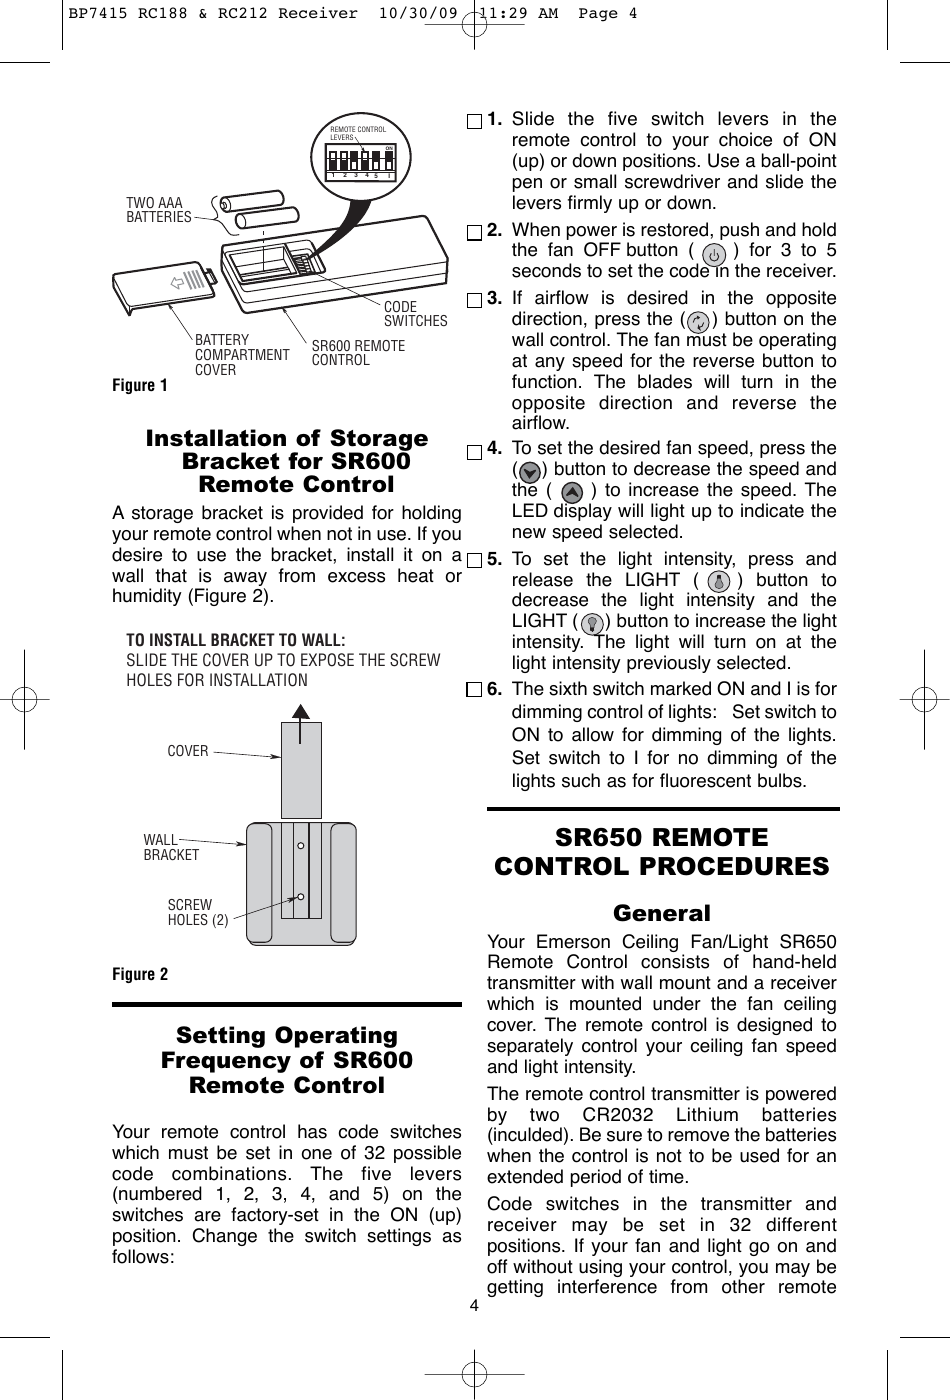 Page 4 of 12 - Emerson Emerson-Rc188-Owners-Manual- BP7415 RC188 & RC212 Receiver  Emerson-rc188-owners-manual